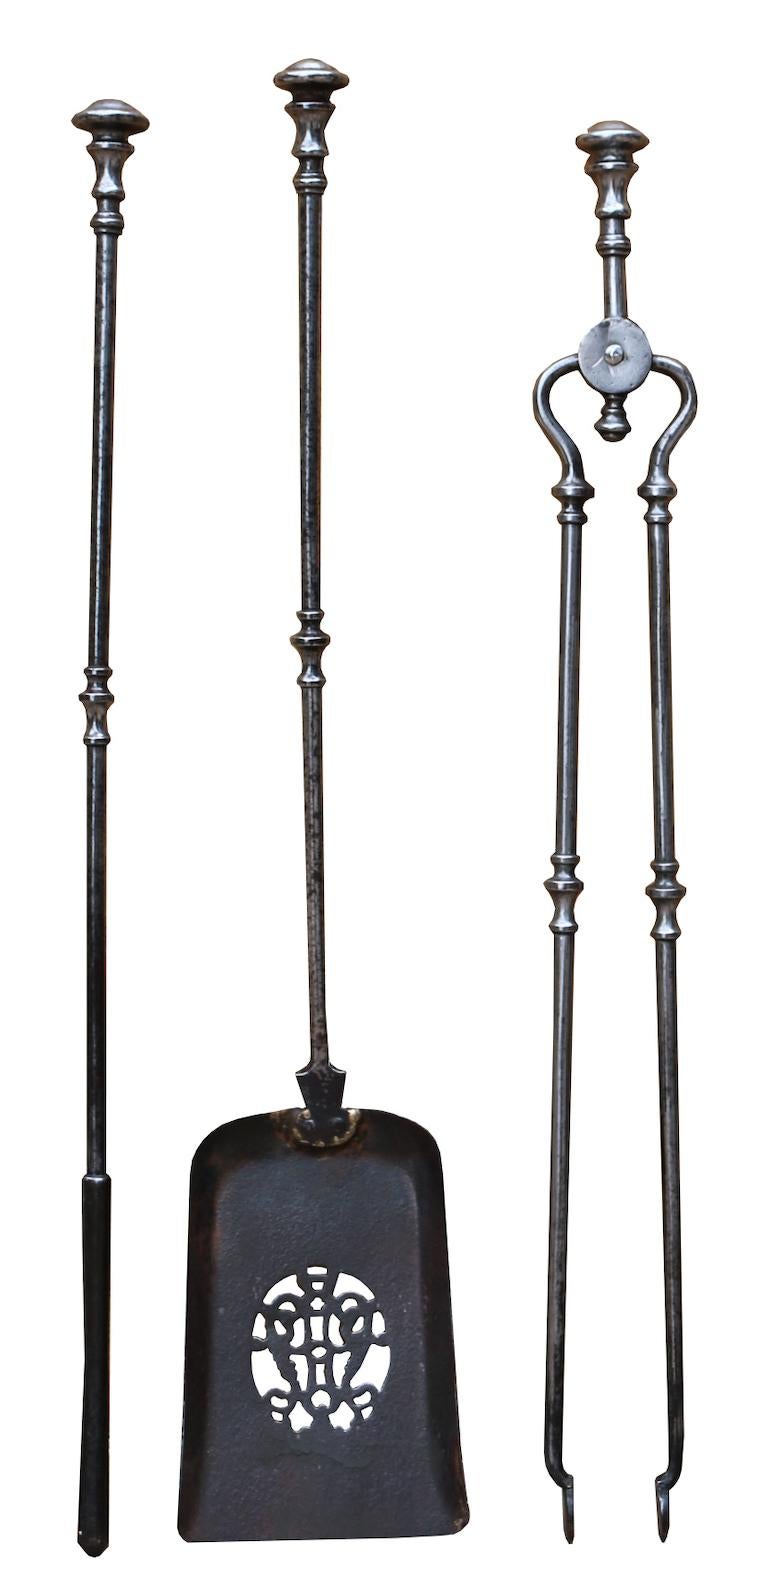 A set of English fire tools, consisting of a poker, tongs and shovel.

Measure: Height 70 cm

Width (of the shovel) 13 cm

Depth 3.5 cm

Weight 3 kg.